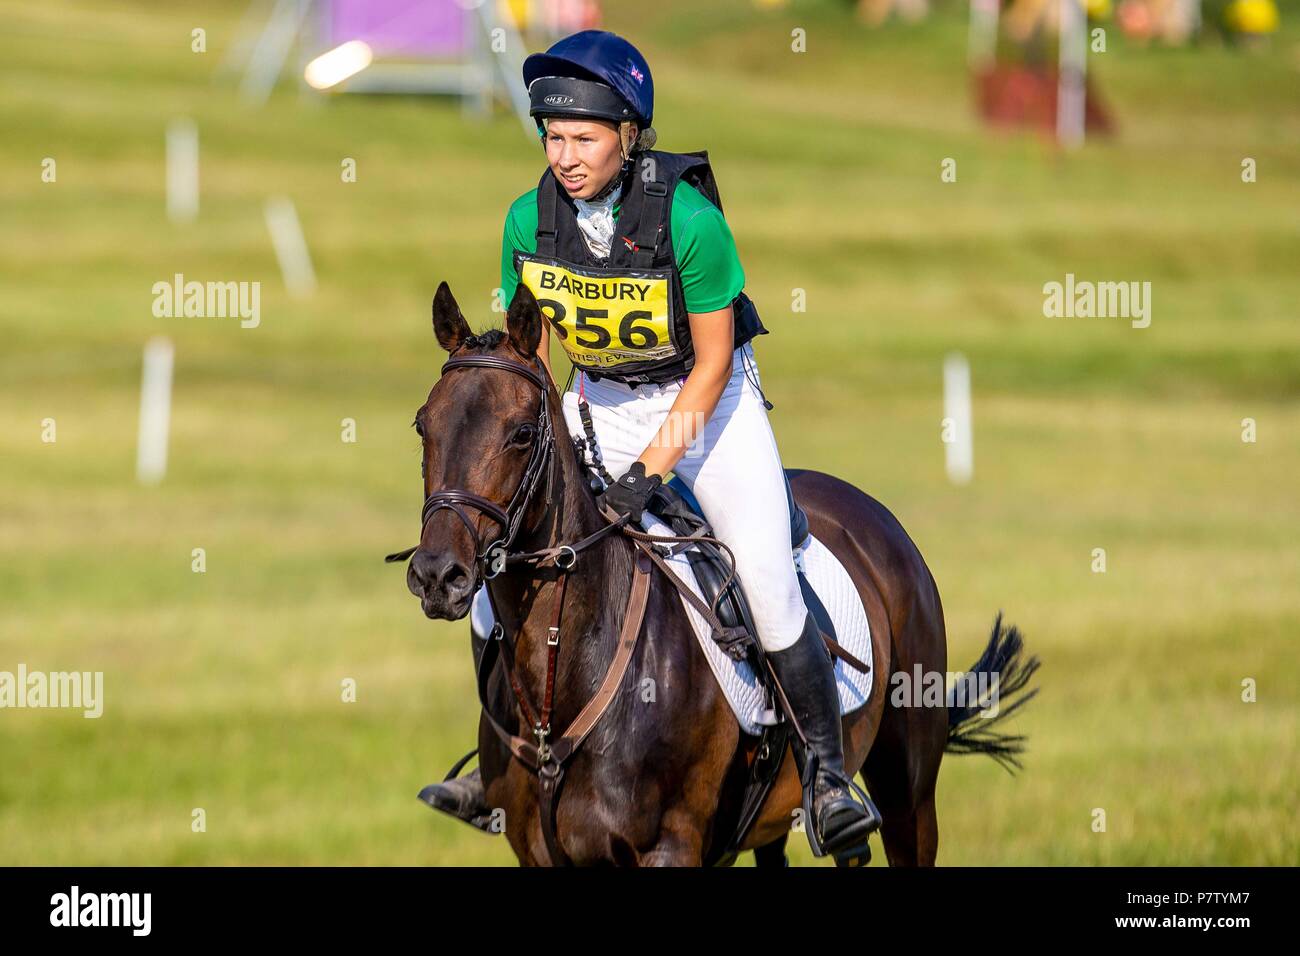 Winner. Connie Gill riding Movie Star ll. GBR. Pony Section M. St James Place Barbury Horse Trials. Horse Trials. Cross Country. Barbury Castle. Wroughton. Somerset. UK. 06/07/2018. Stock Photo